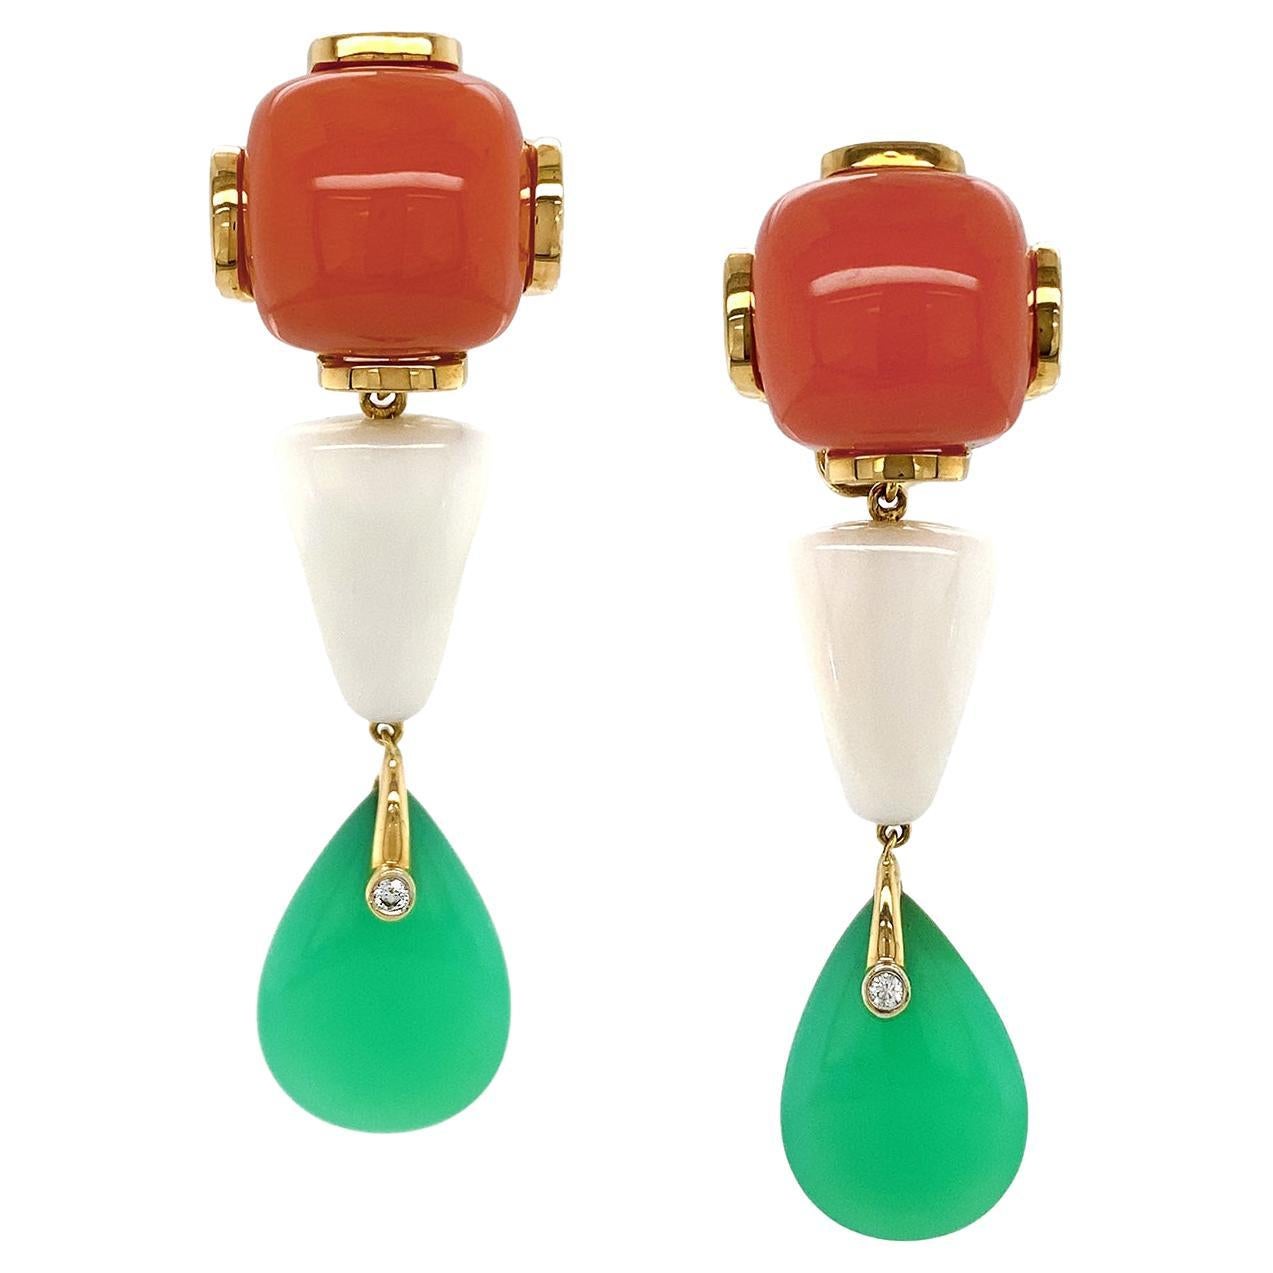 Coral and Chrysoprase Drop Earrings